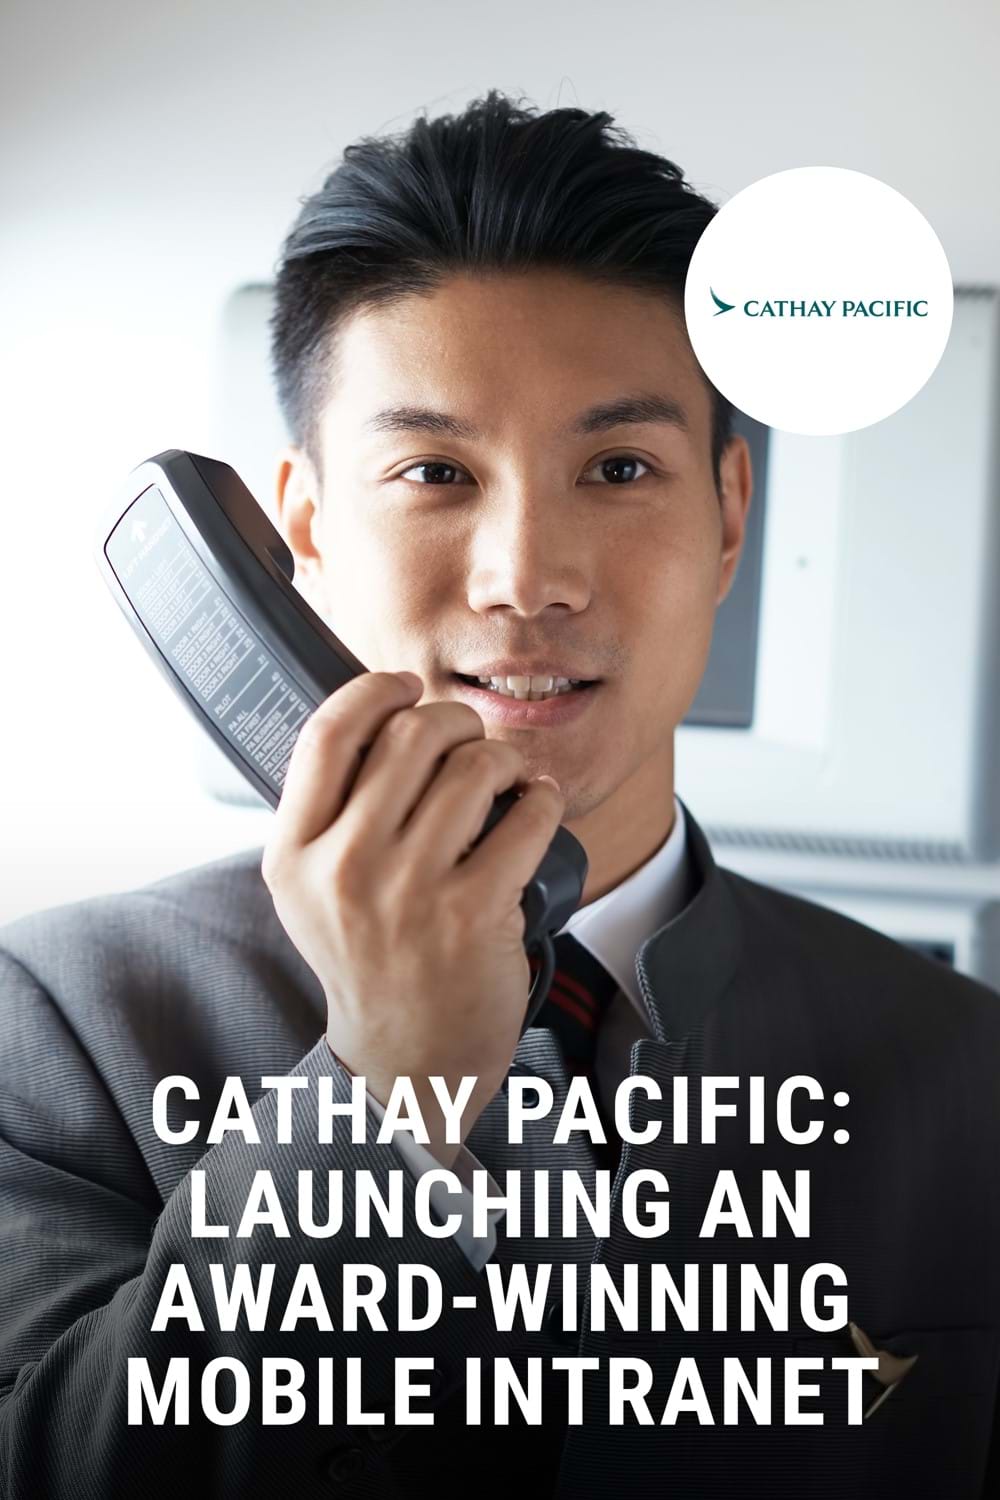 Cathay Pacific: Launching an award-winning mobile intranet' case study flat pages